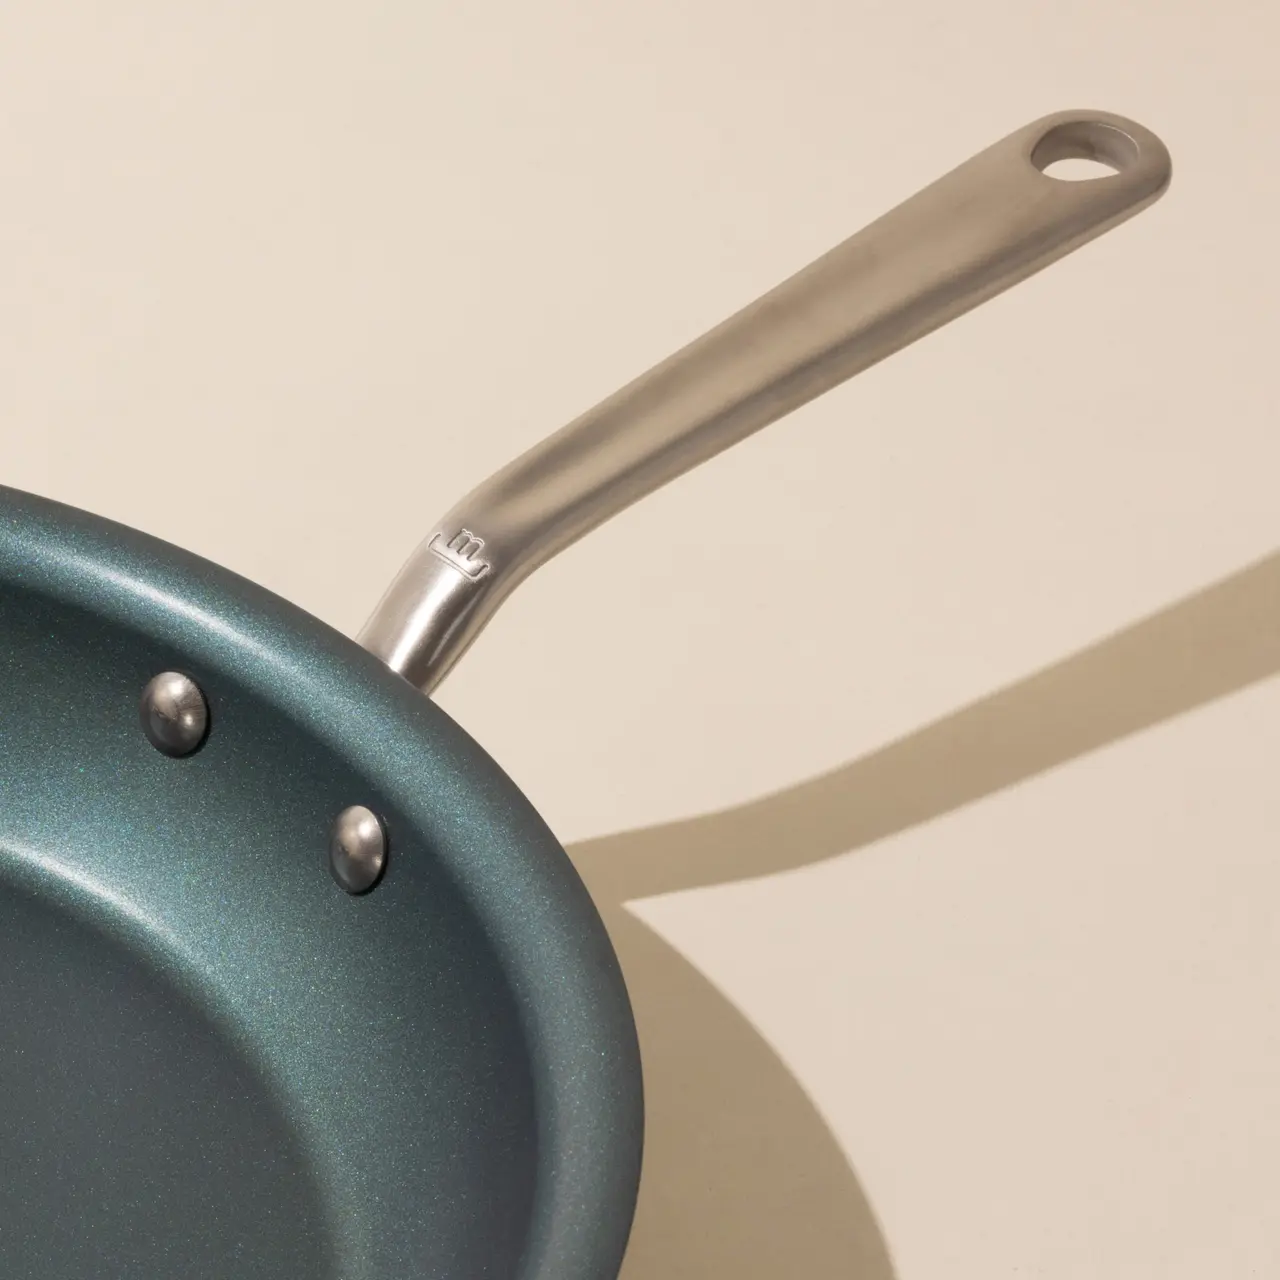 A blue non-stick frying pan with a stainless steel handle casts a shadow on a light surface.